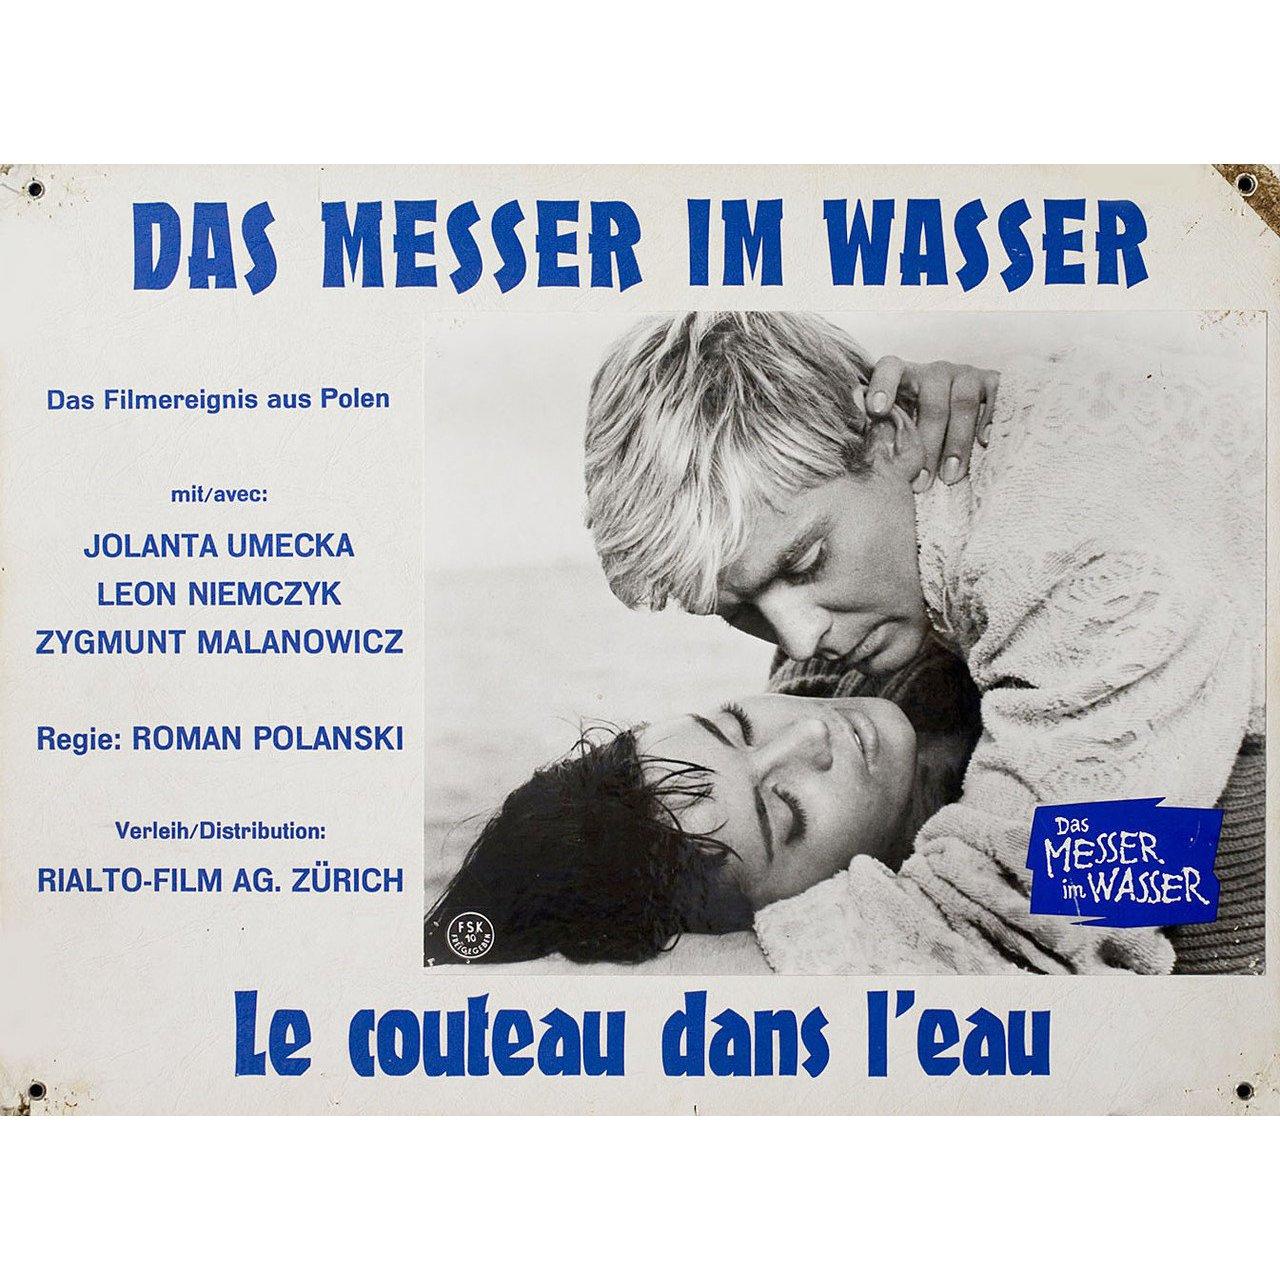 Original 1962 Swiss scene card for the film Knife in the Water (Noz w wodzie) directed by Roman Polanski with Leon Niemczyk / Jolanta Umecka / Zygmunt Malanowicz. Very good condition. Please note: the size is stated in inches and the actual size can